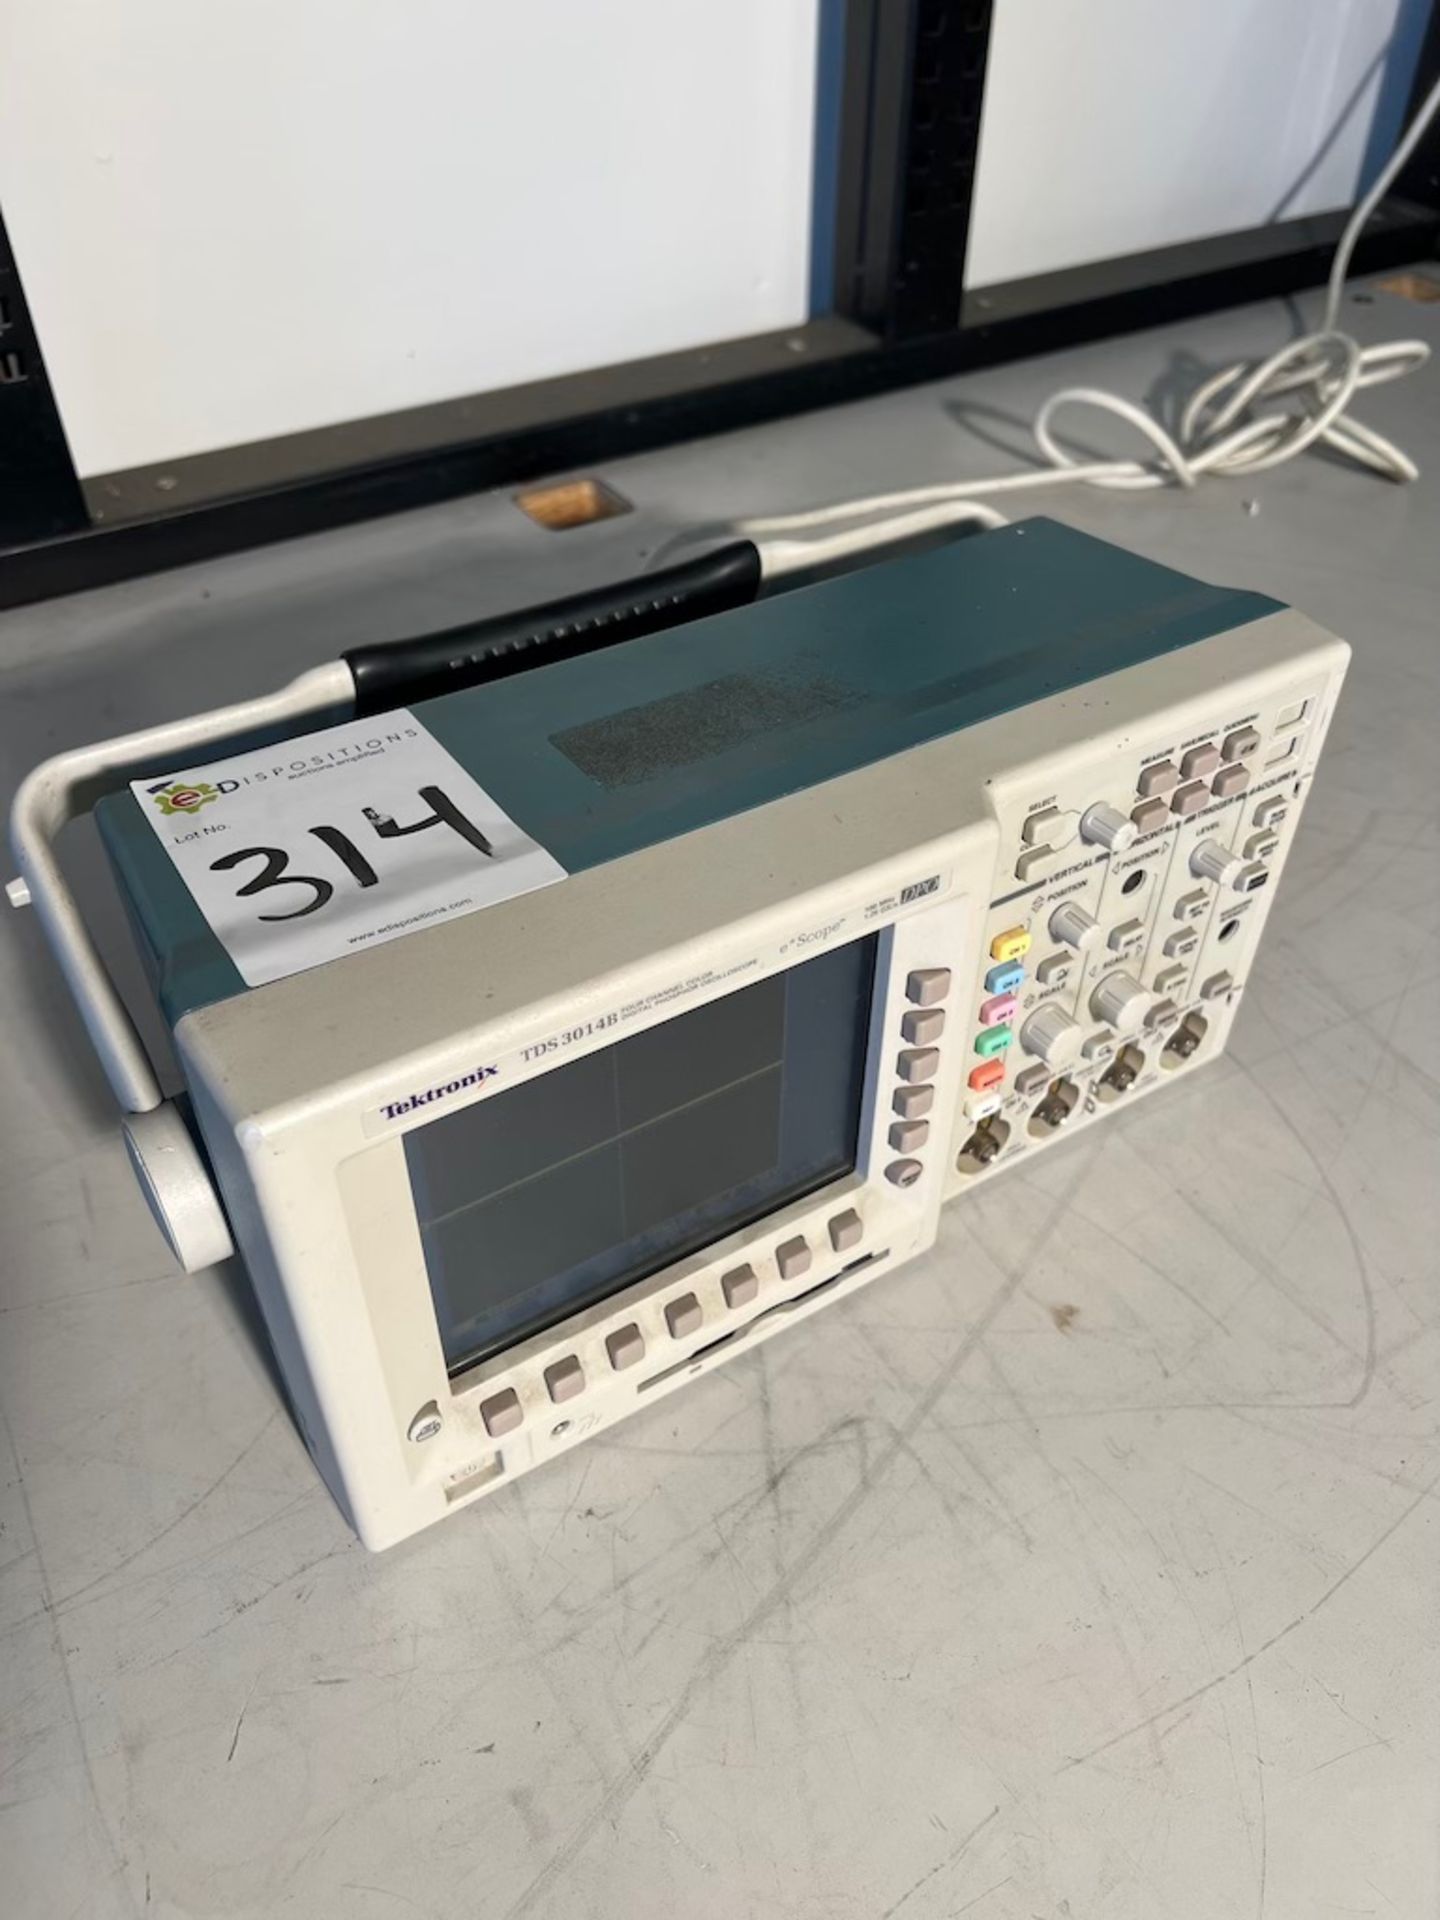 Tektronix TDS30114B Four Channel Color Digital Phosphor Oscilloscope 100Mhz 91.25 Gs/s. Located at - Image 2 of 3